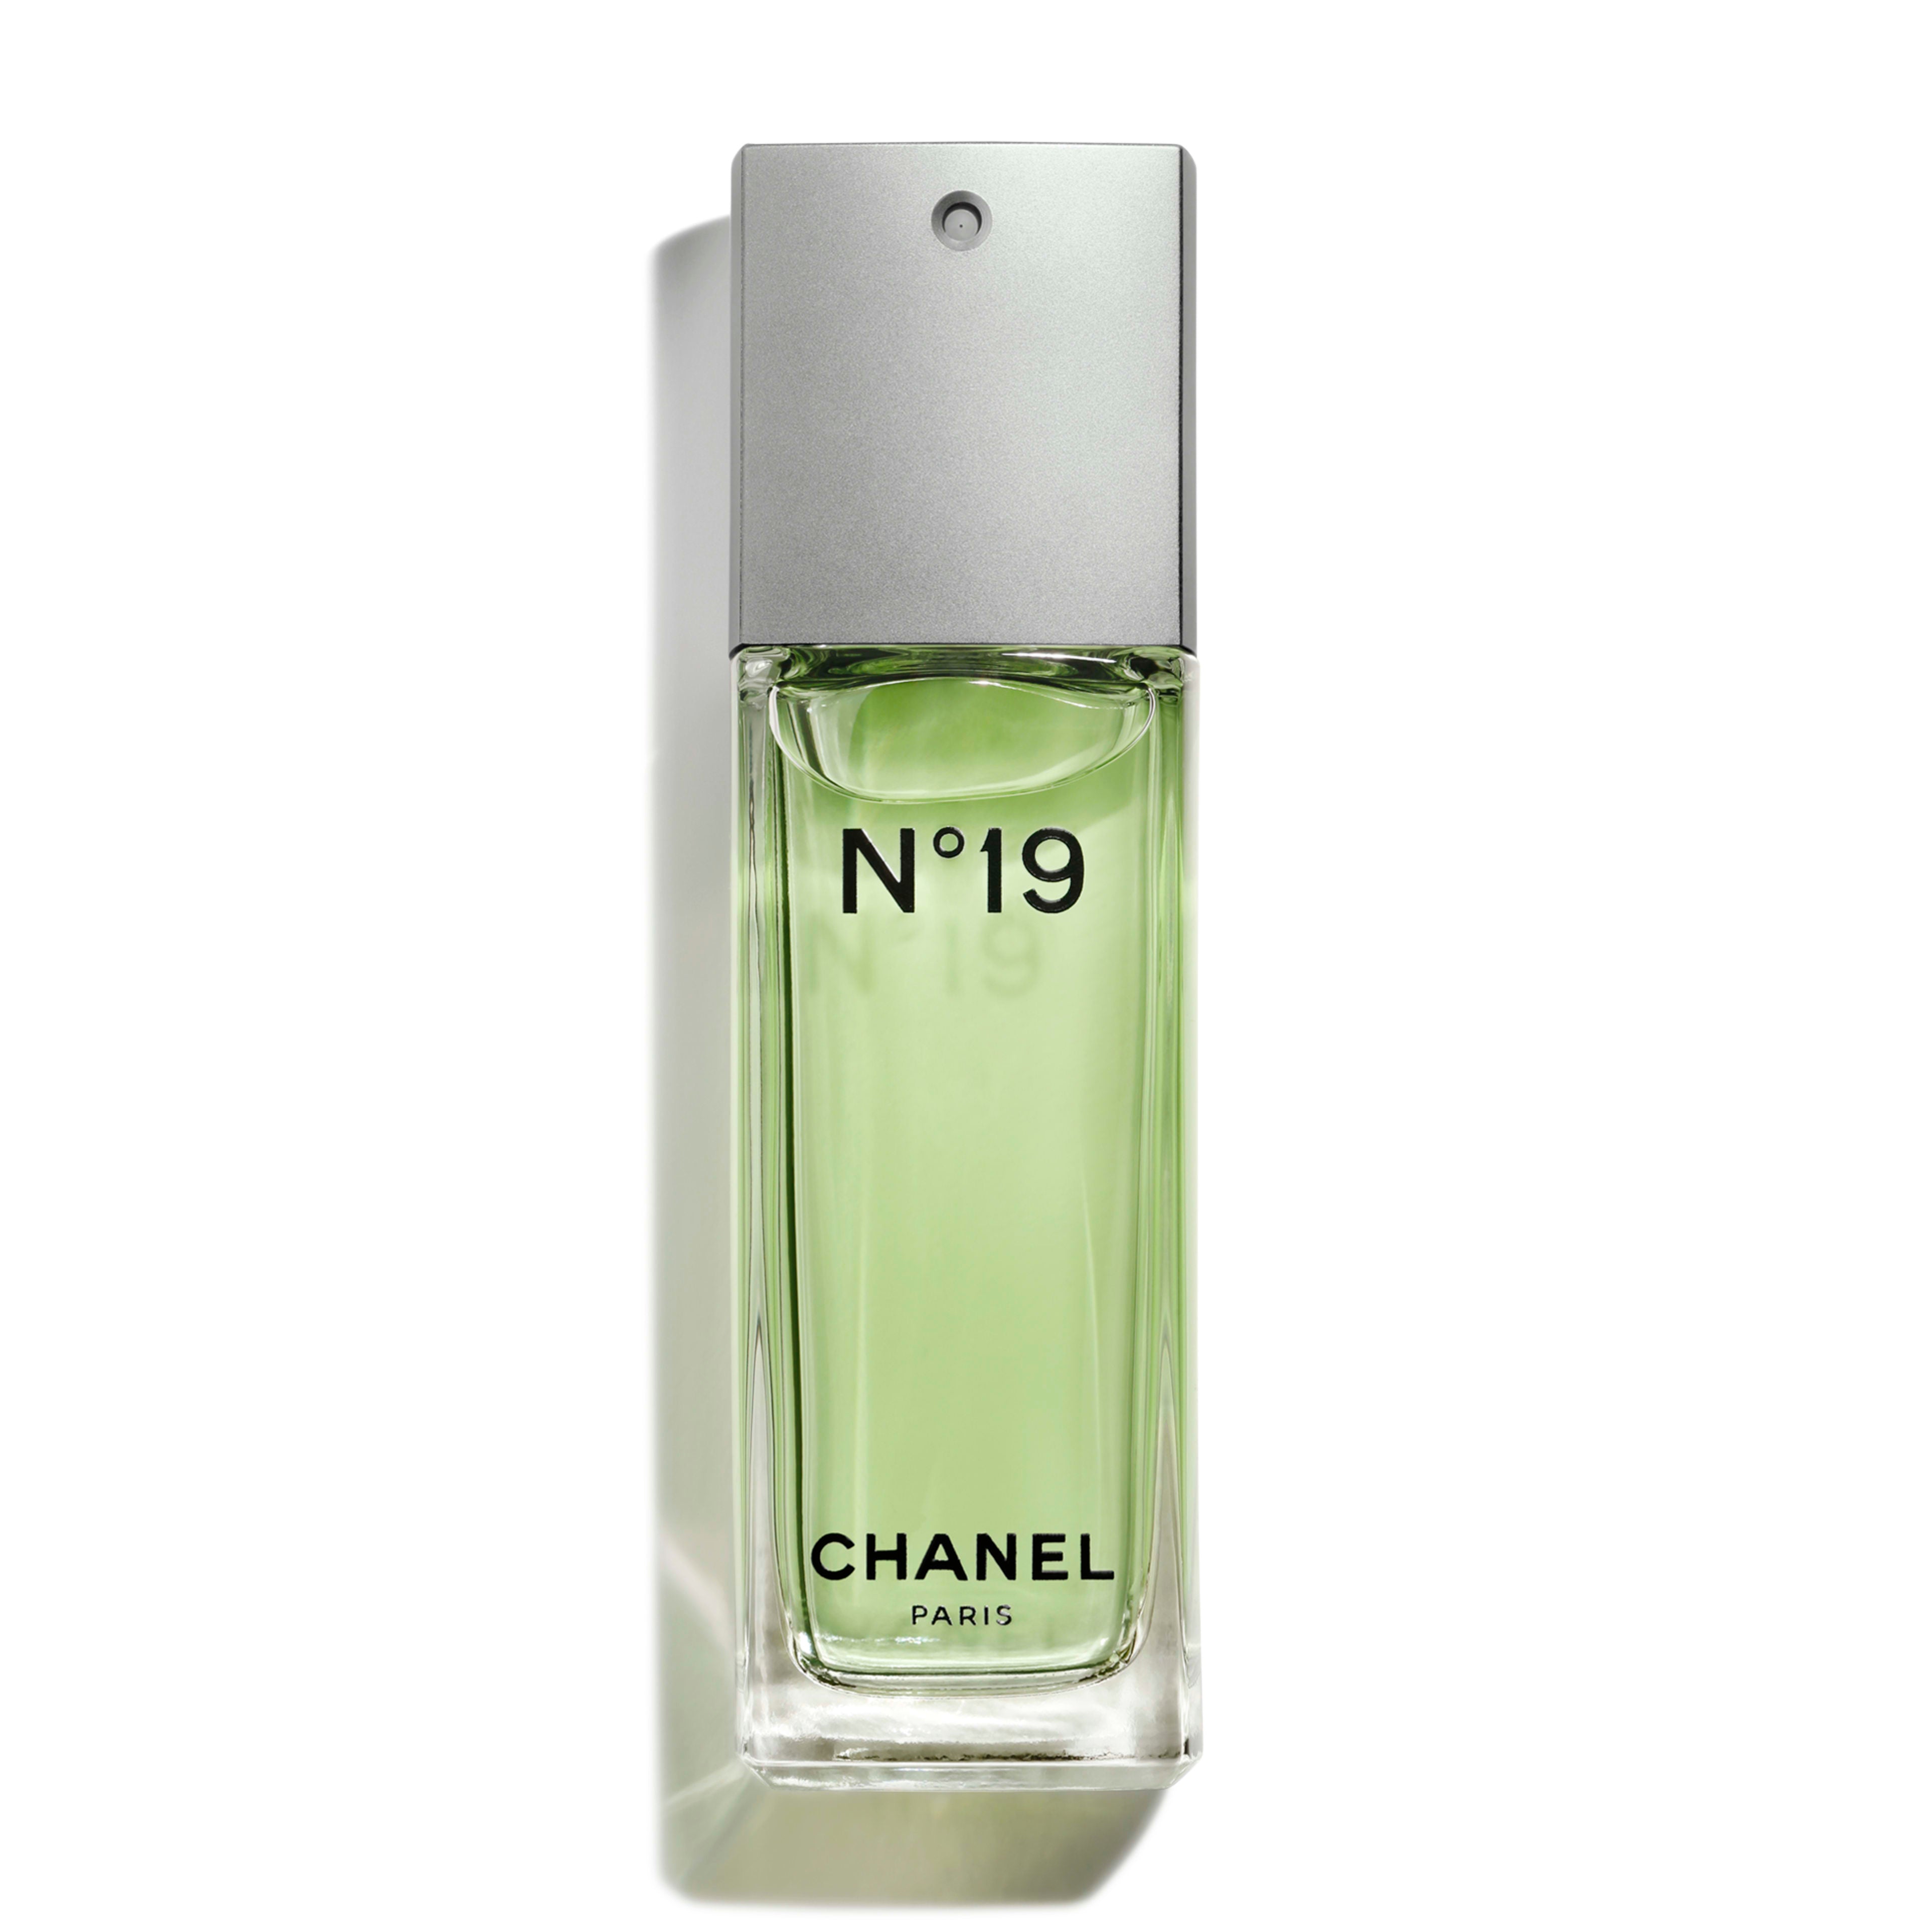 Sold at Auction: Chanel No. 5, fragrance by CHANEL. France